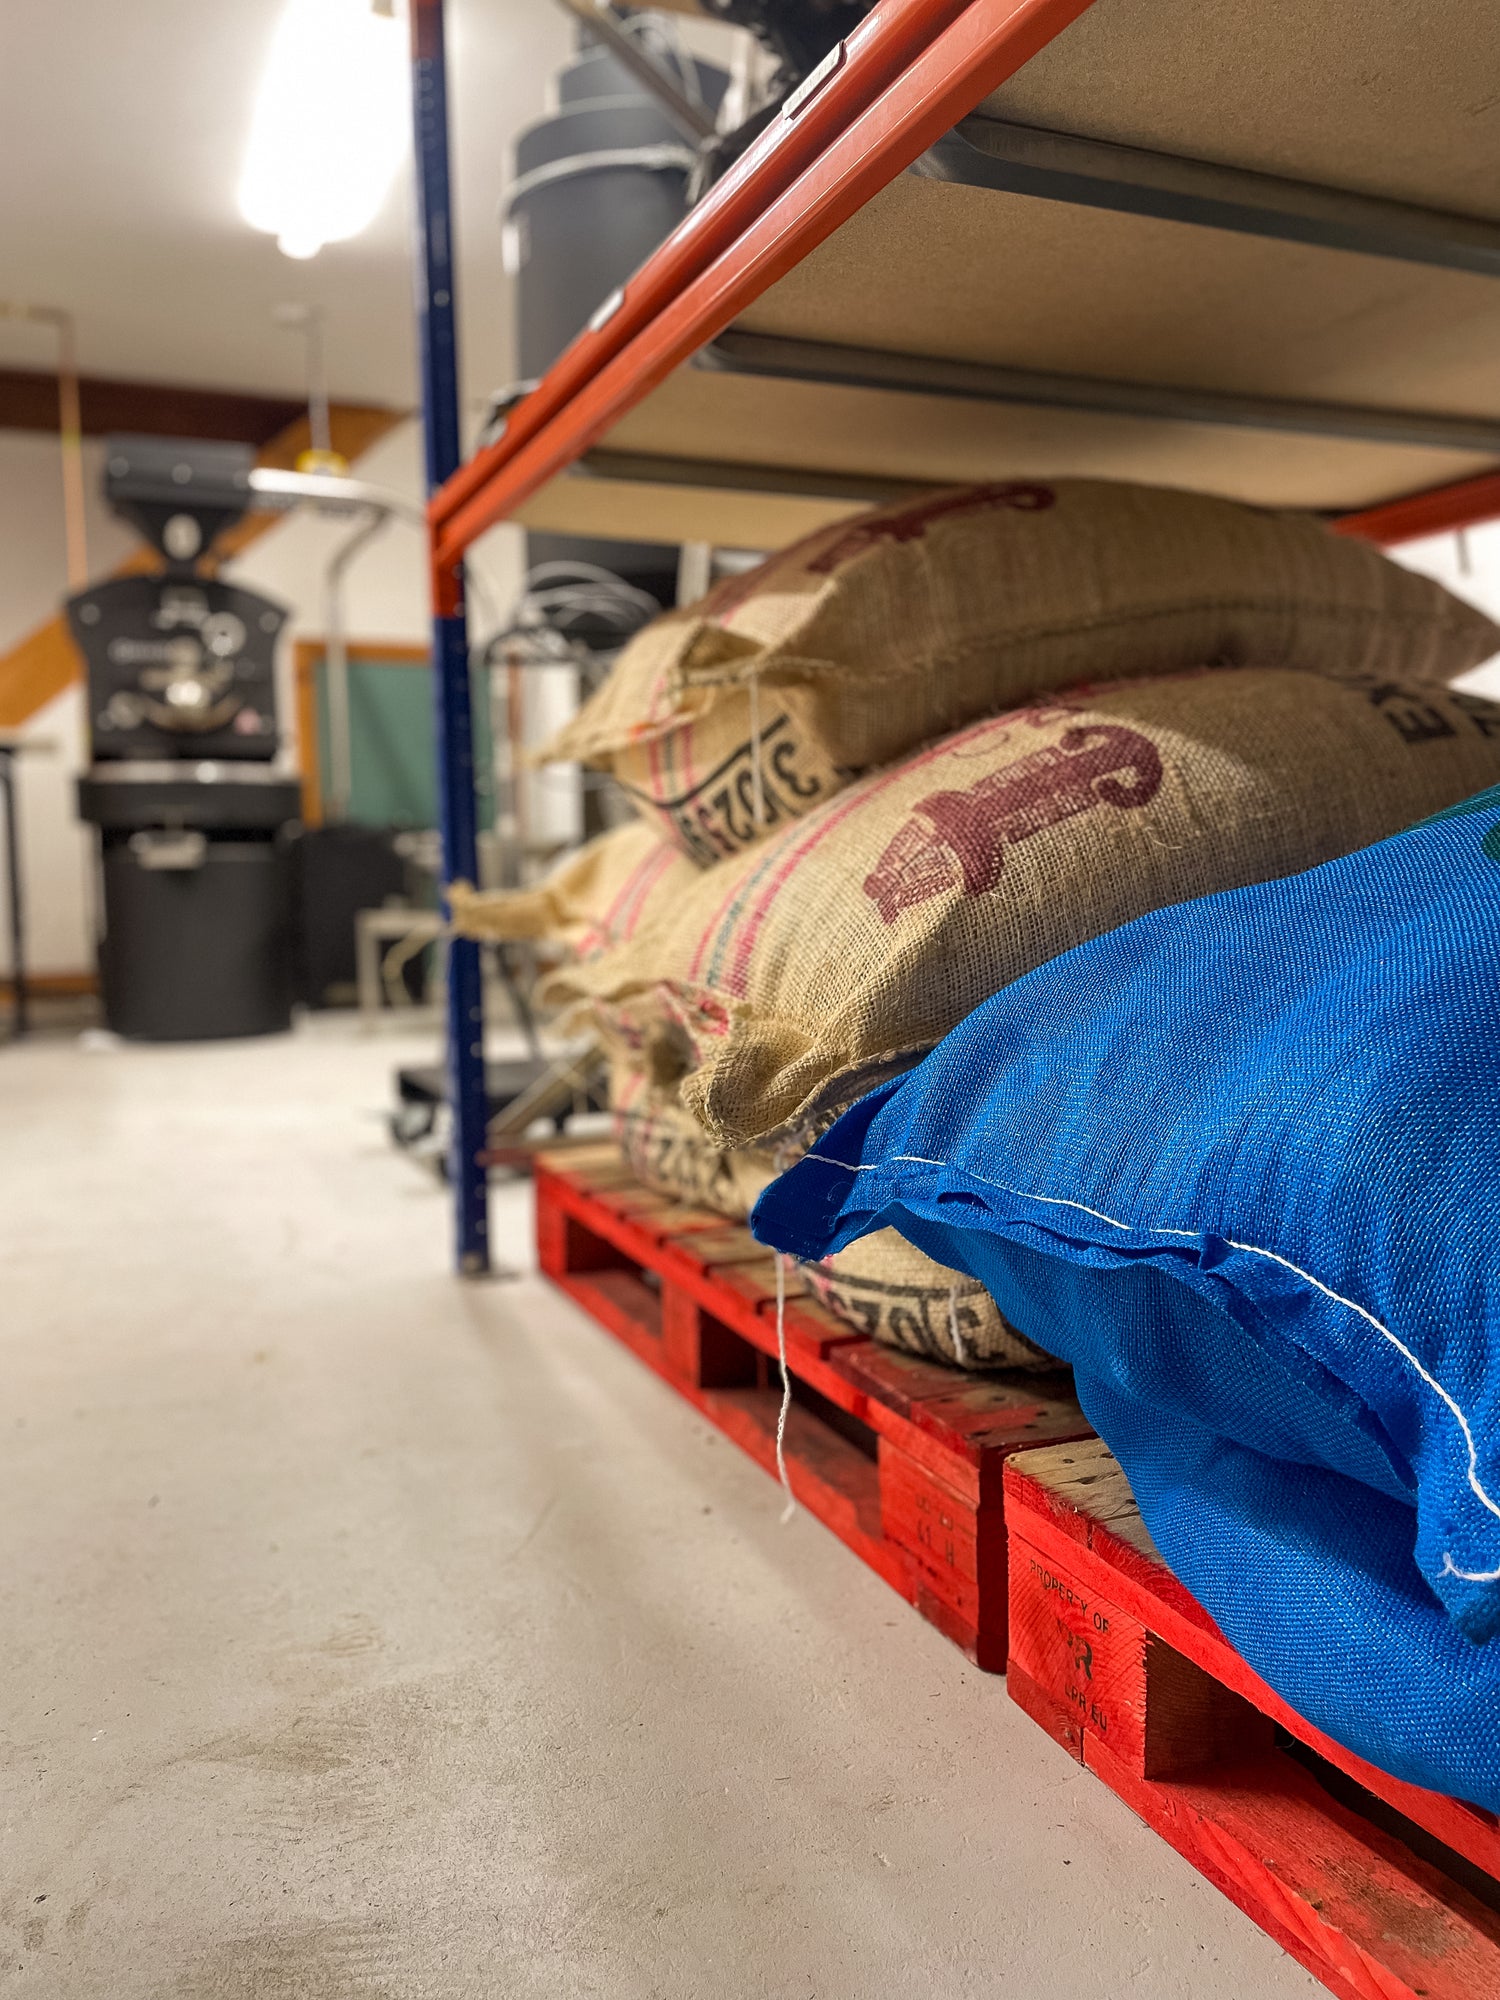 60kg sacks of specialty green coffee in the Ómra Coffee roastery in Northern Ireland